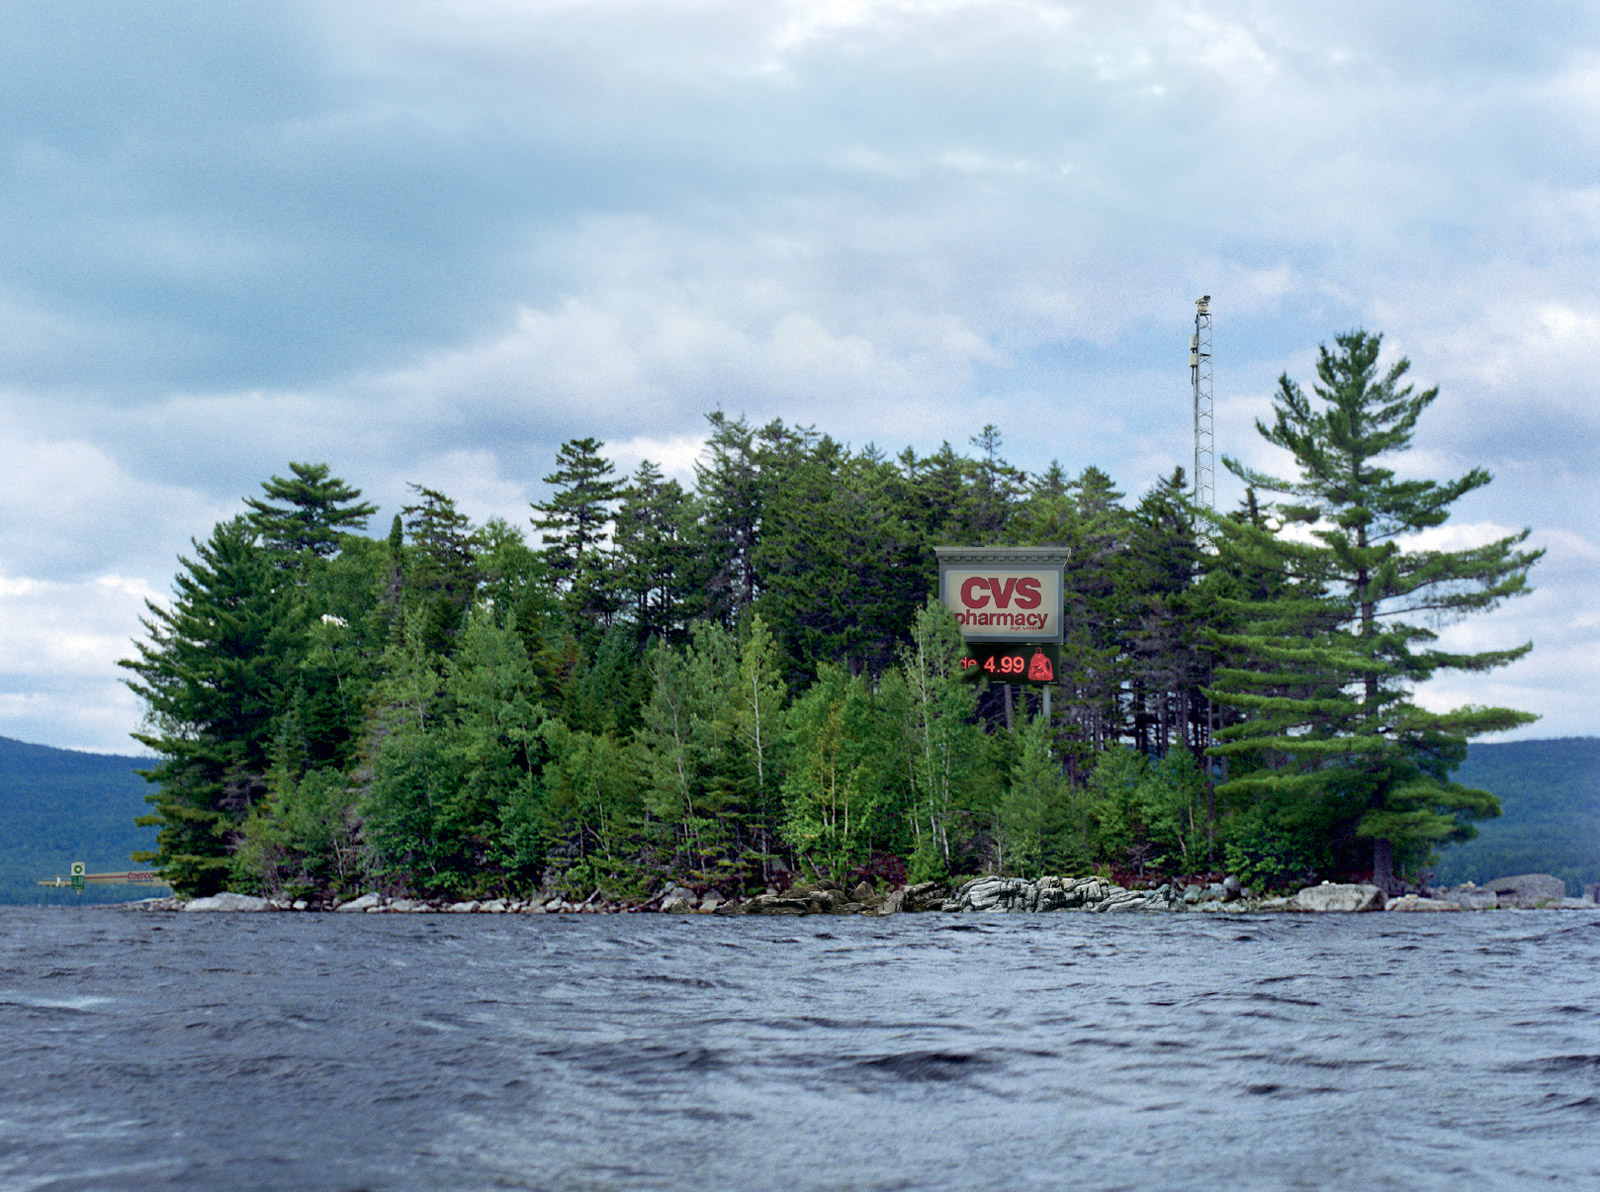 The front of this issue’s postcard featuring a two thousand and five photographic image by Mary Mattingly in which signage for a CVS pharmacy can be seen among a grove of trees on a small, uninhabited island. 